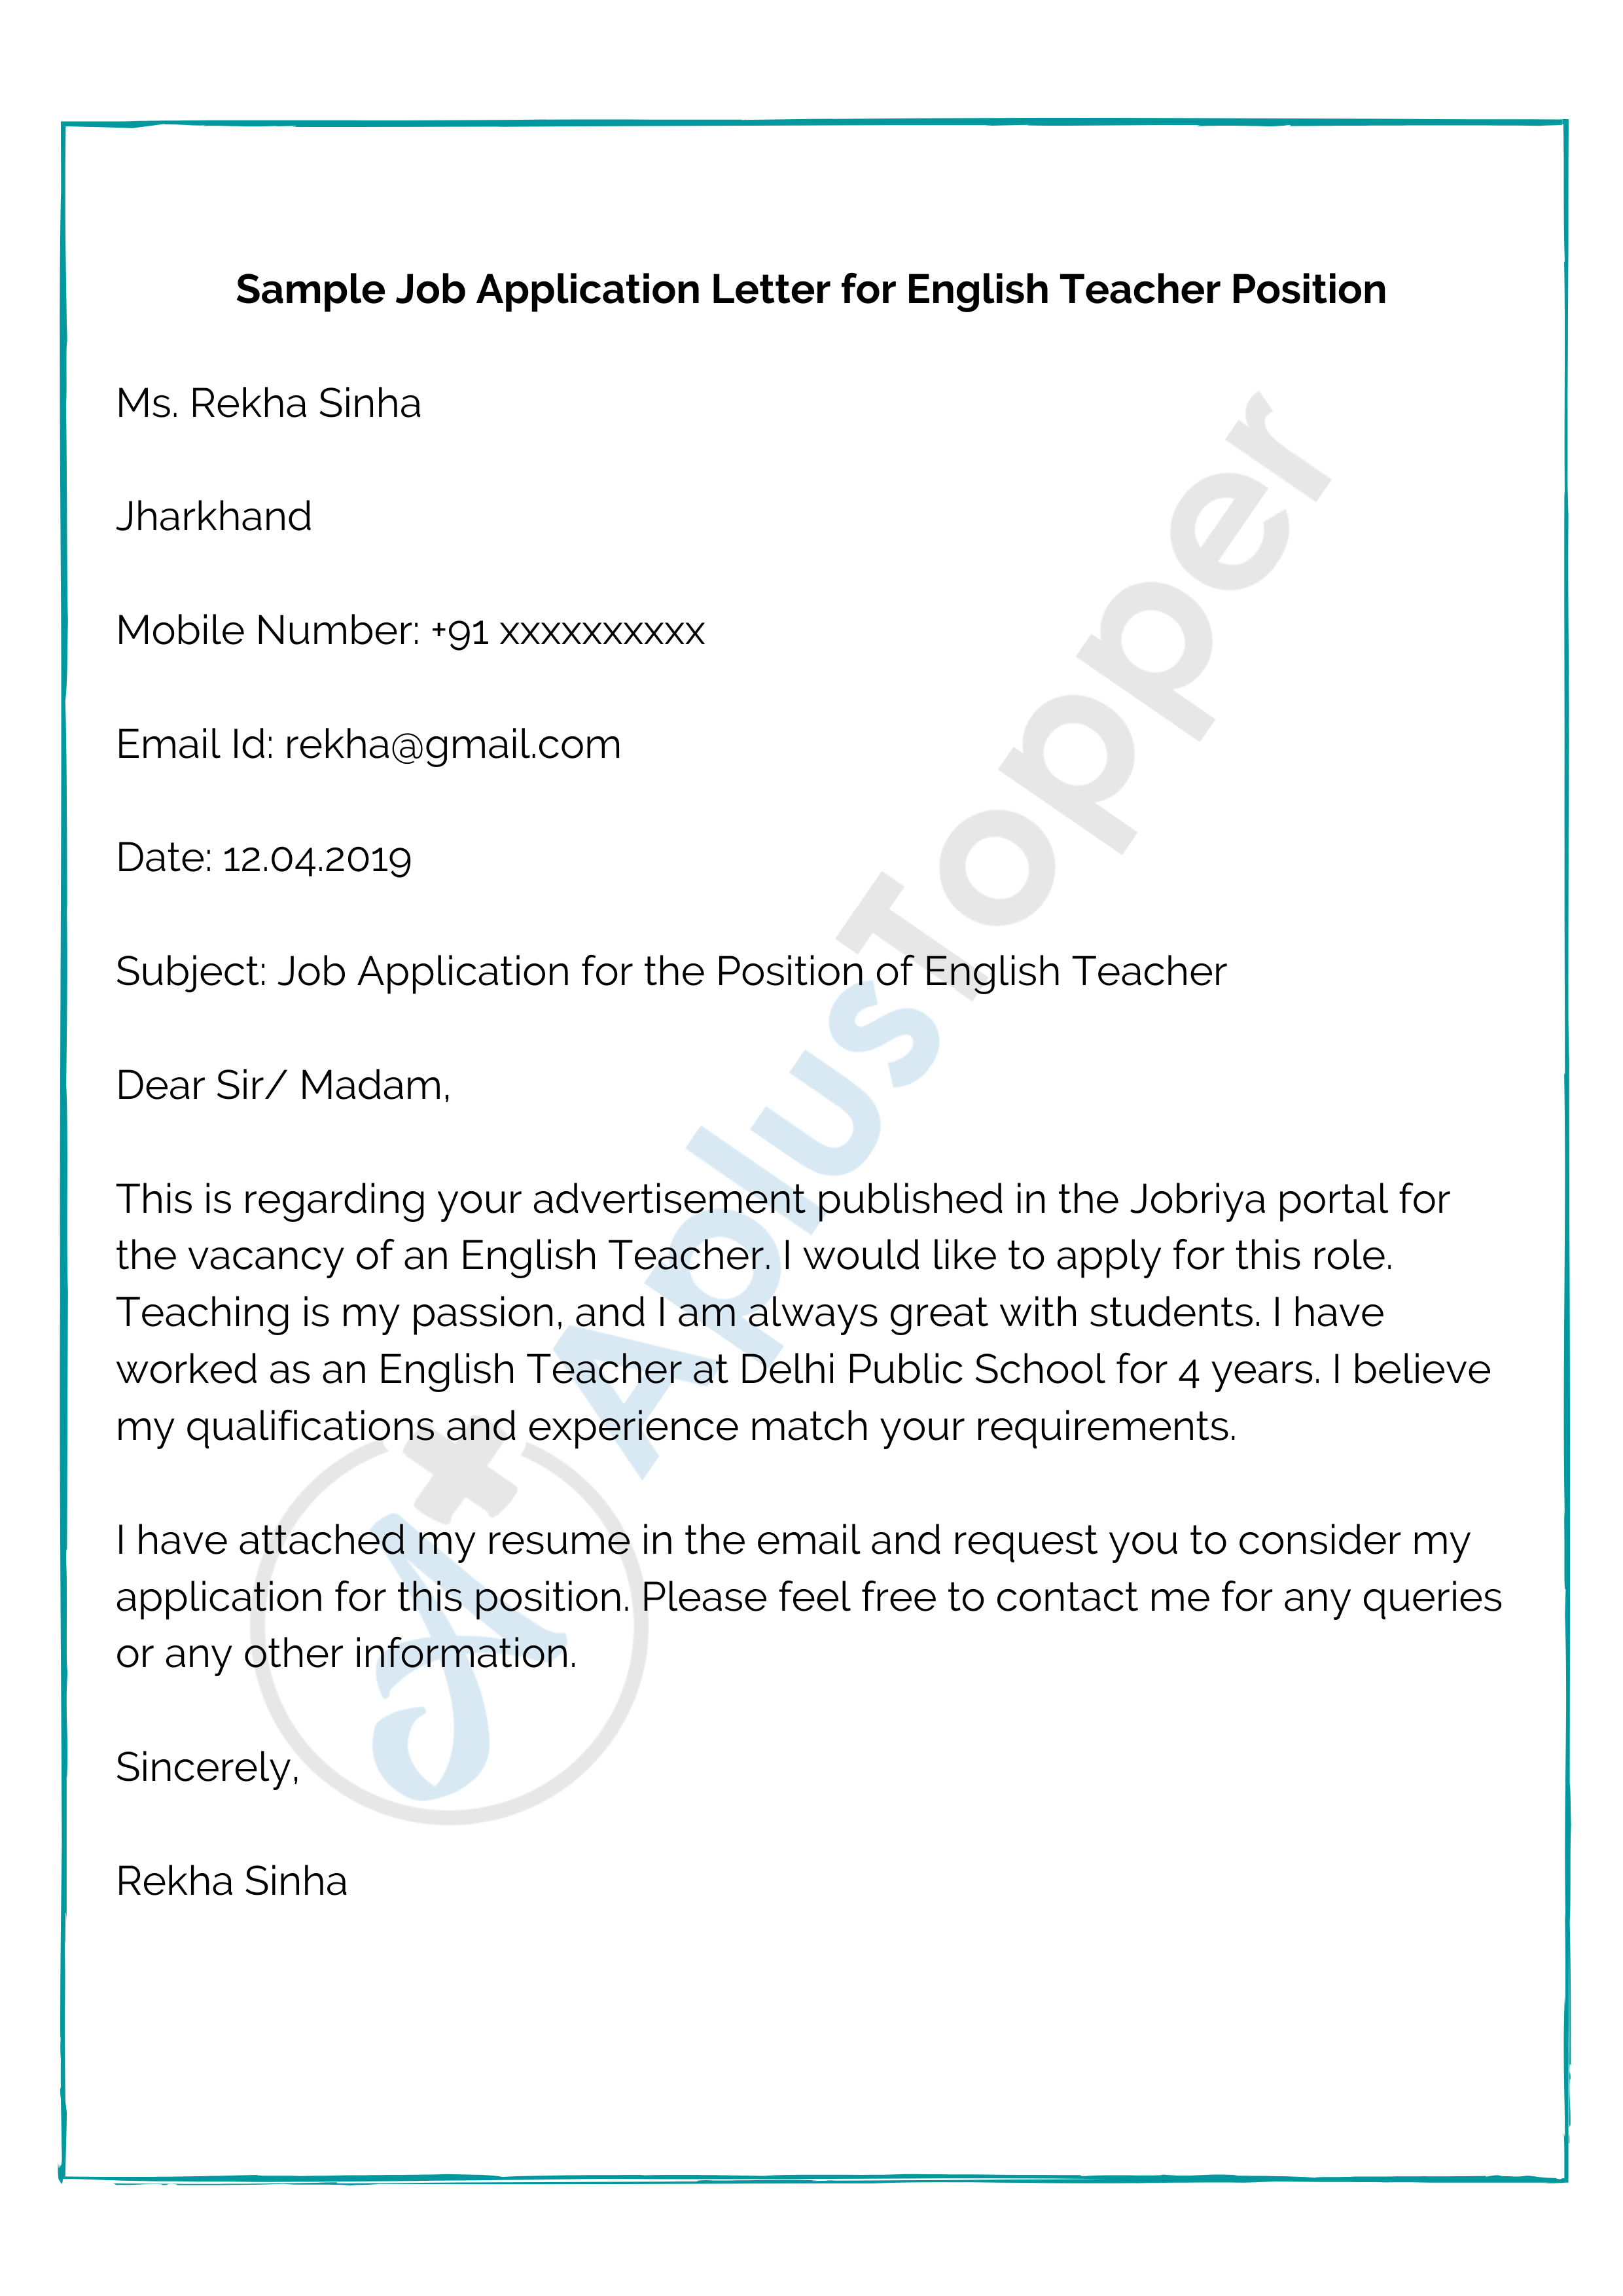 Job Application Letter | Format, Samples, How To Write A Job